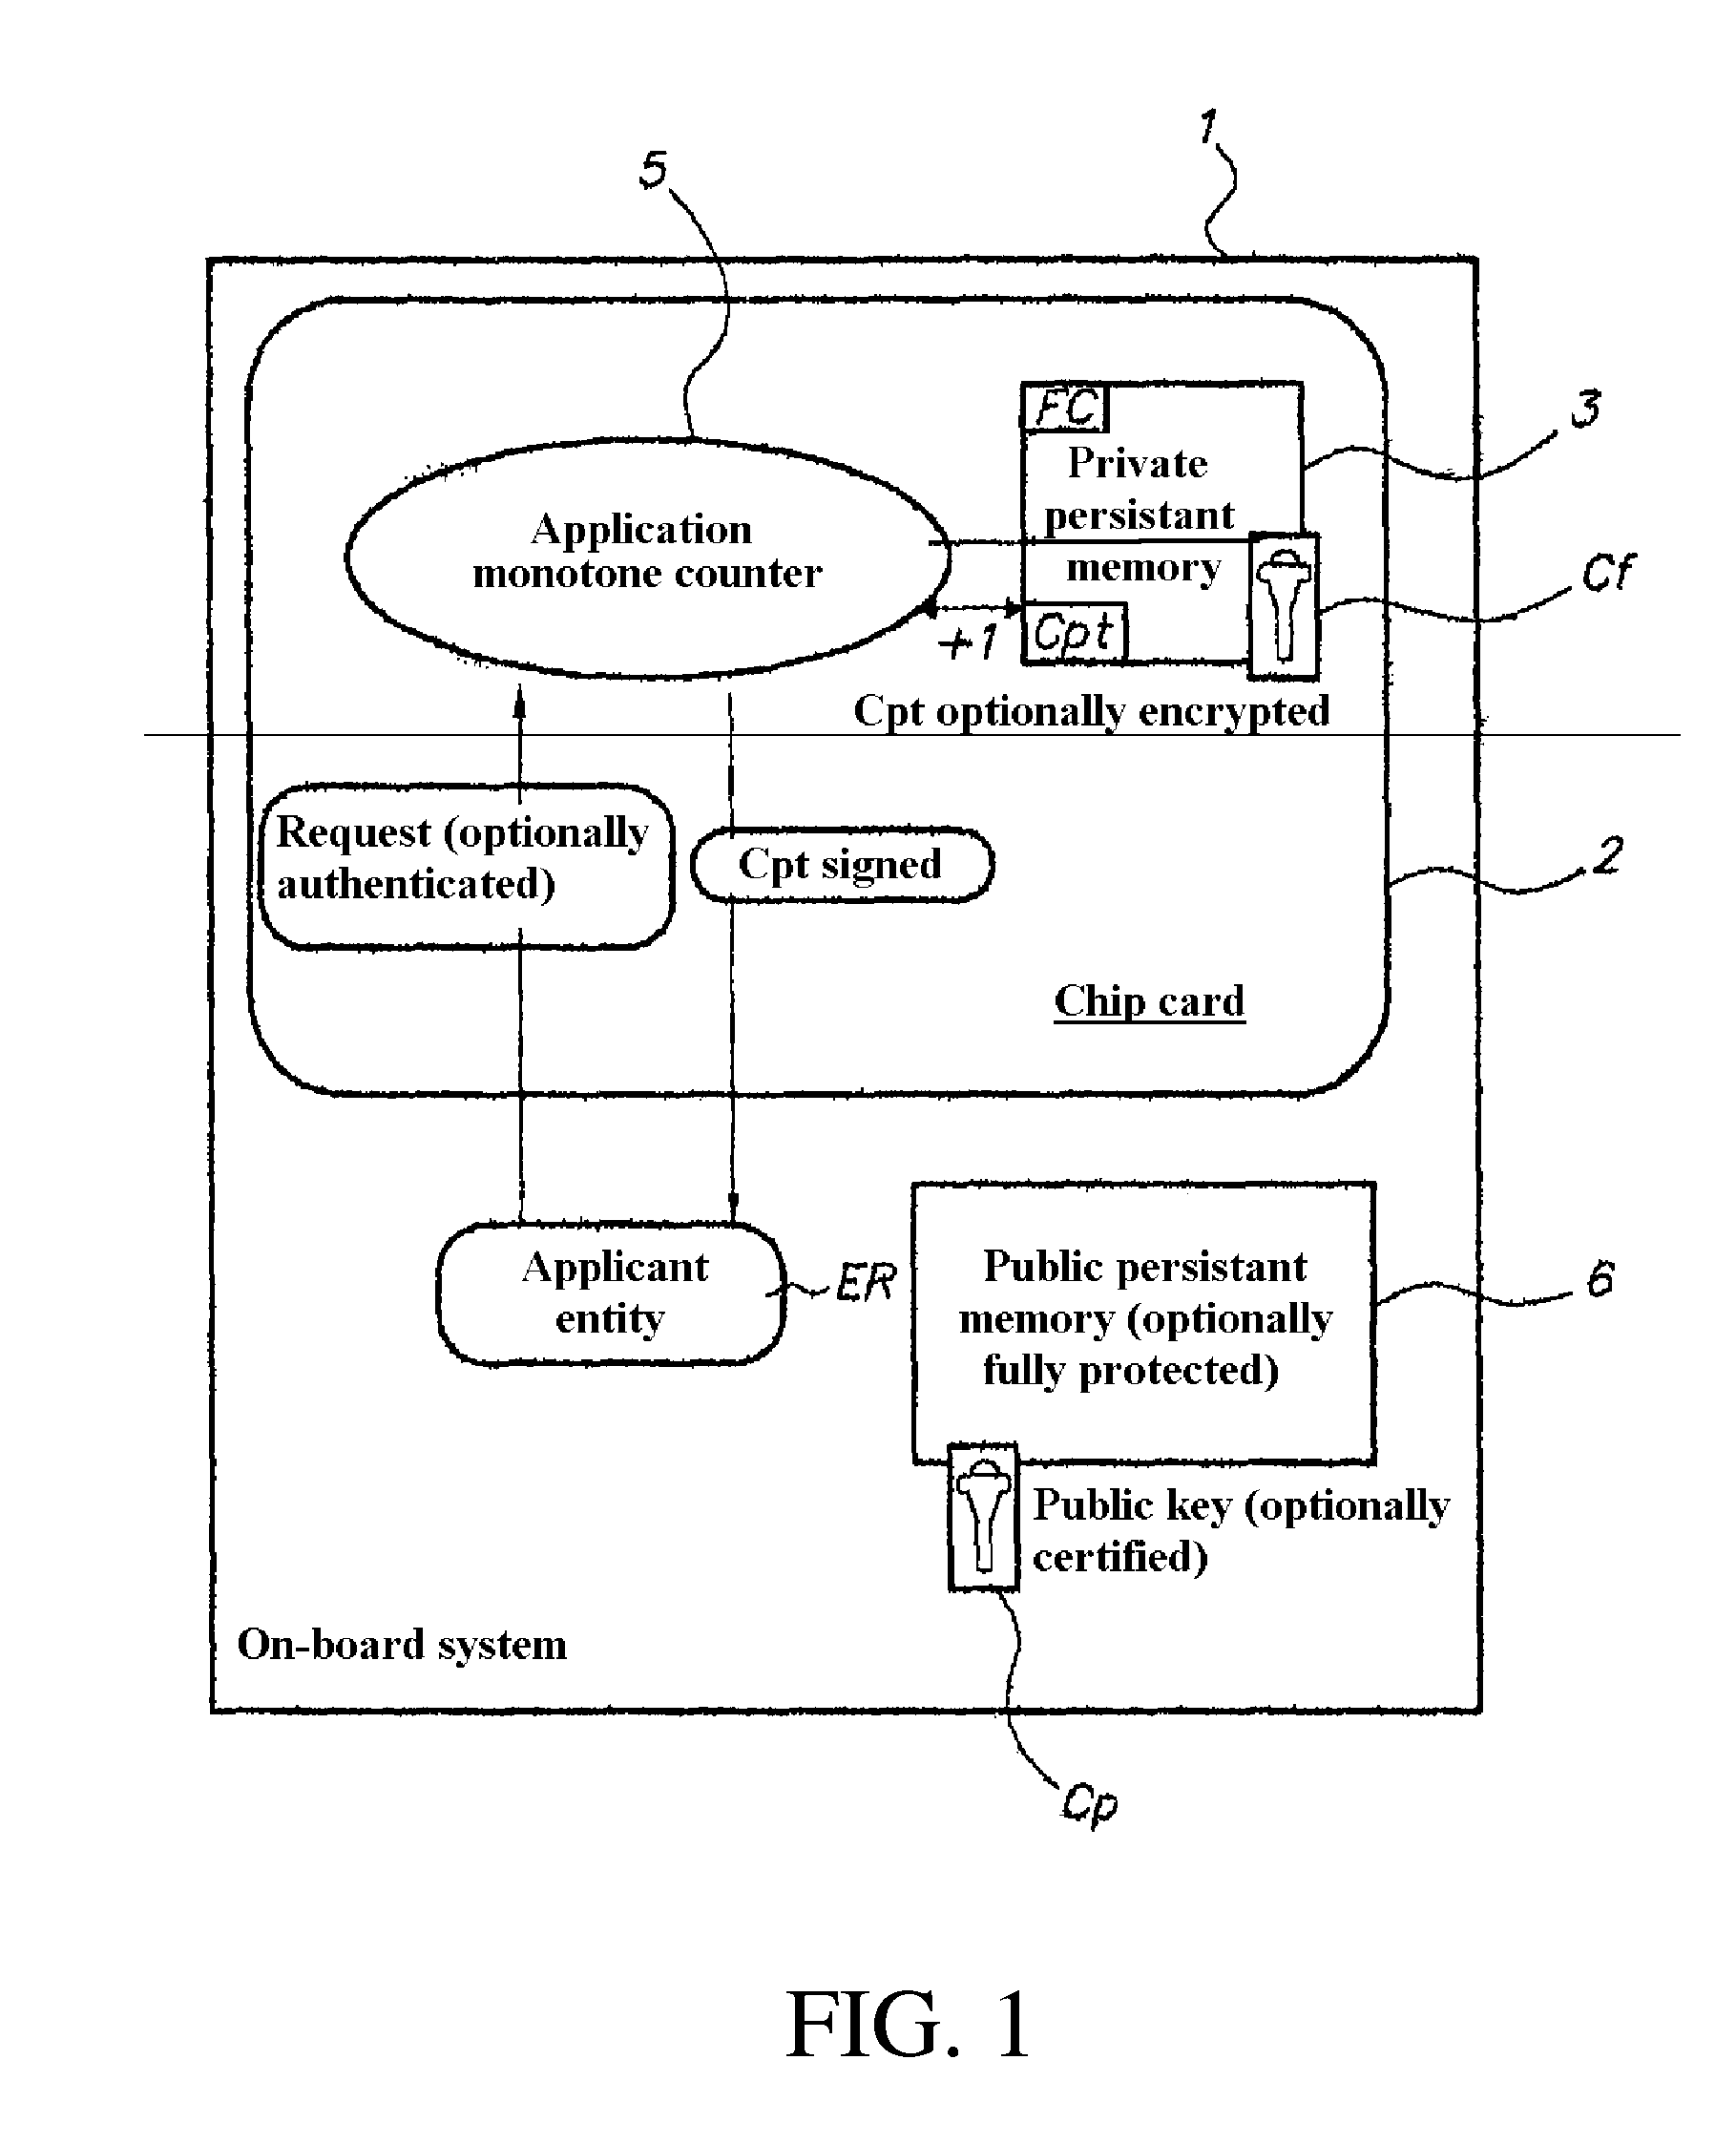 Method for creating a secure counter on an on-board computer system comprising a chip card